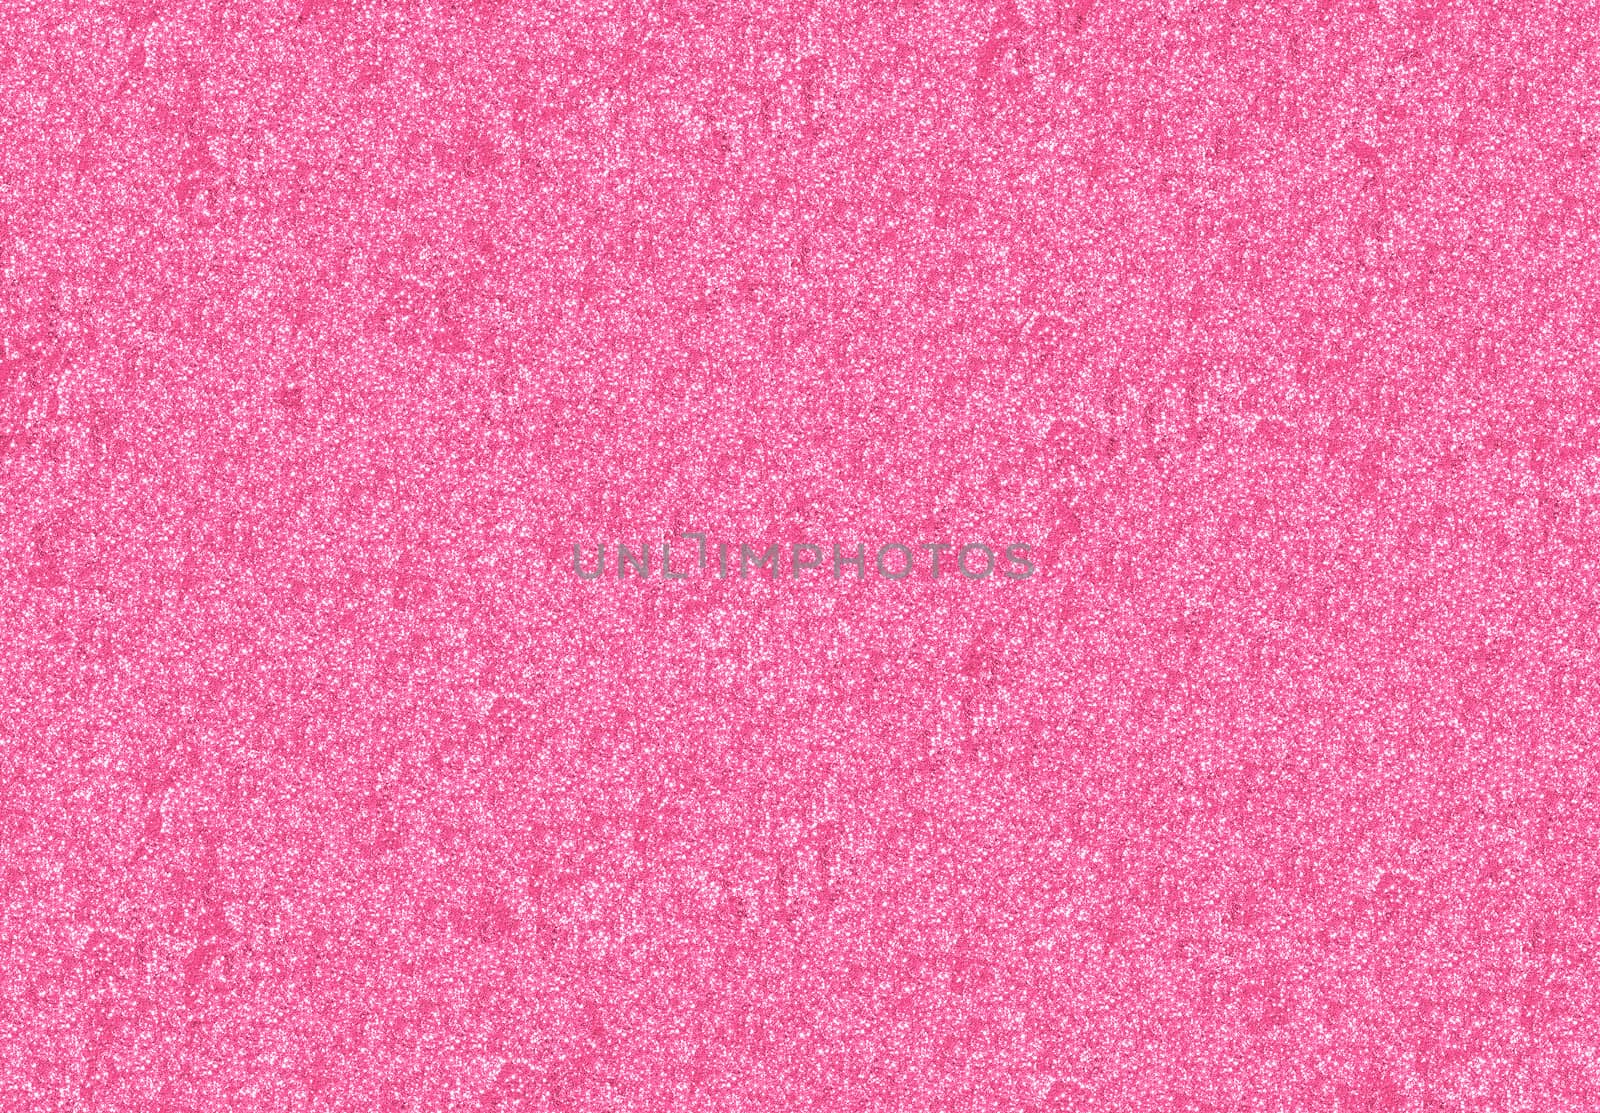 a funky pink glitter background with nobody